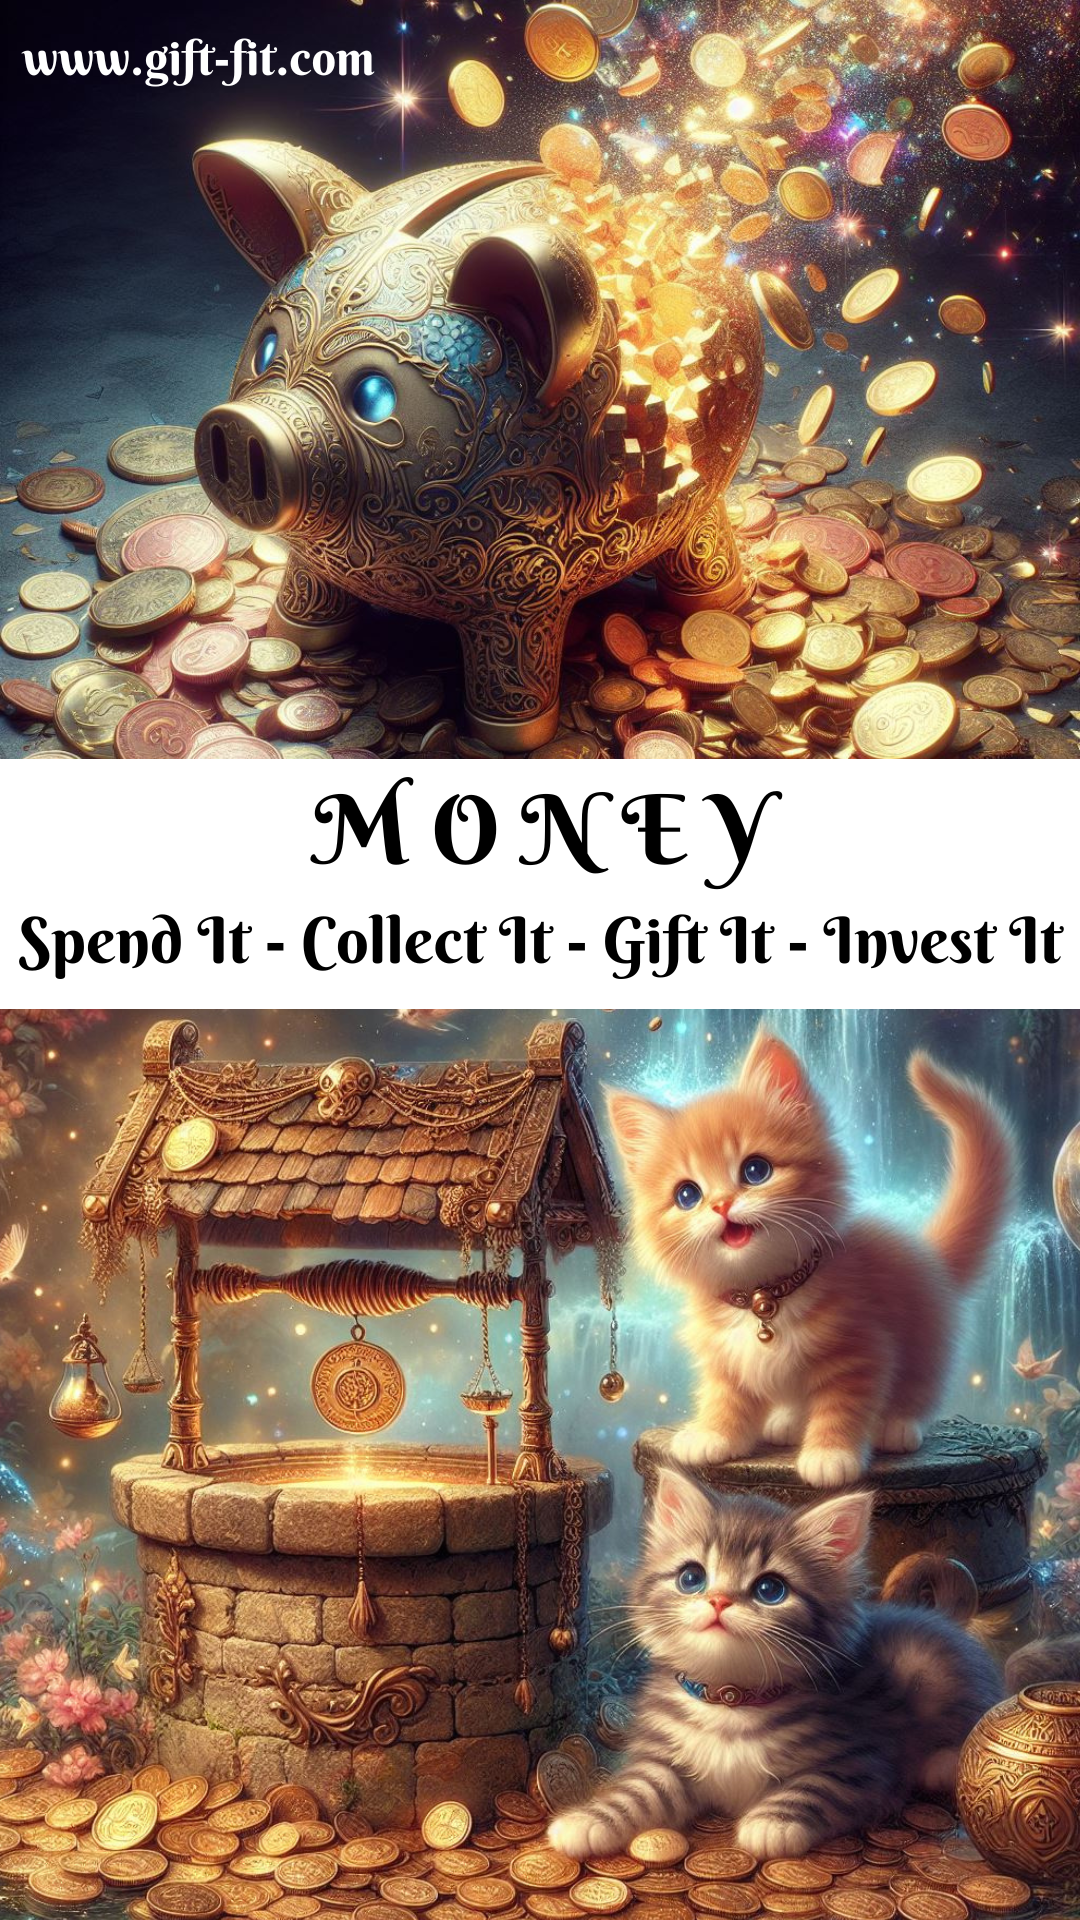 Re-gifting Unwanted Gifts: Gift Giving Etiquette - money